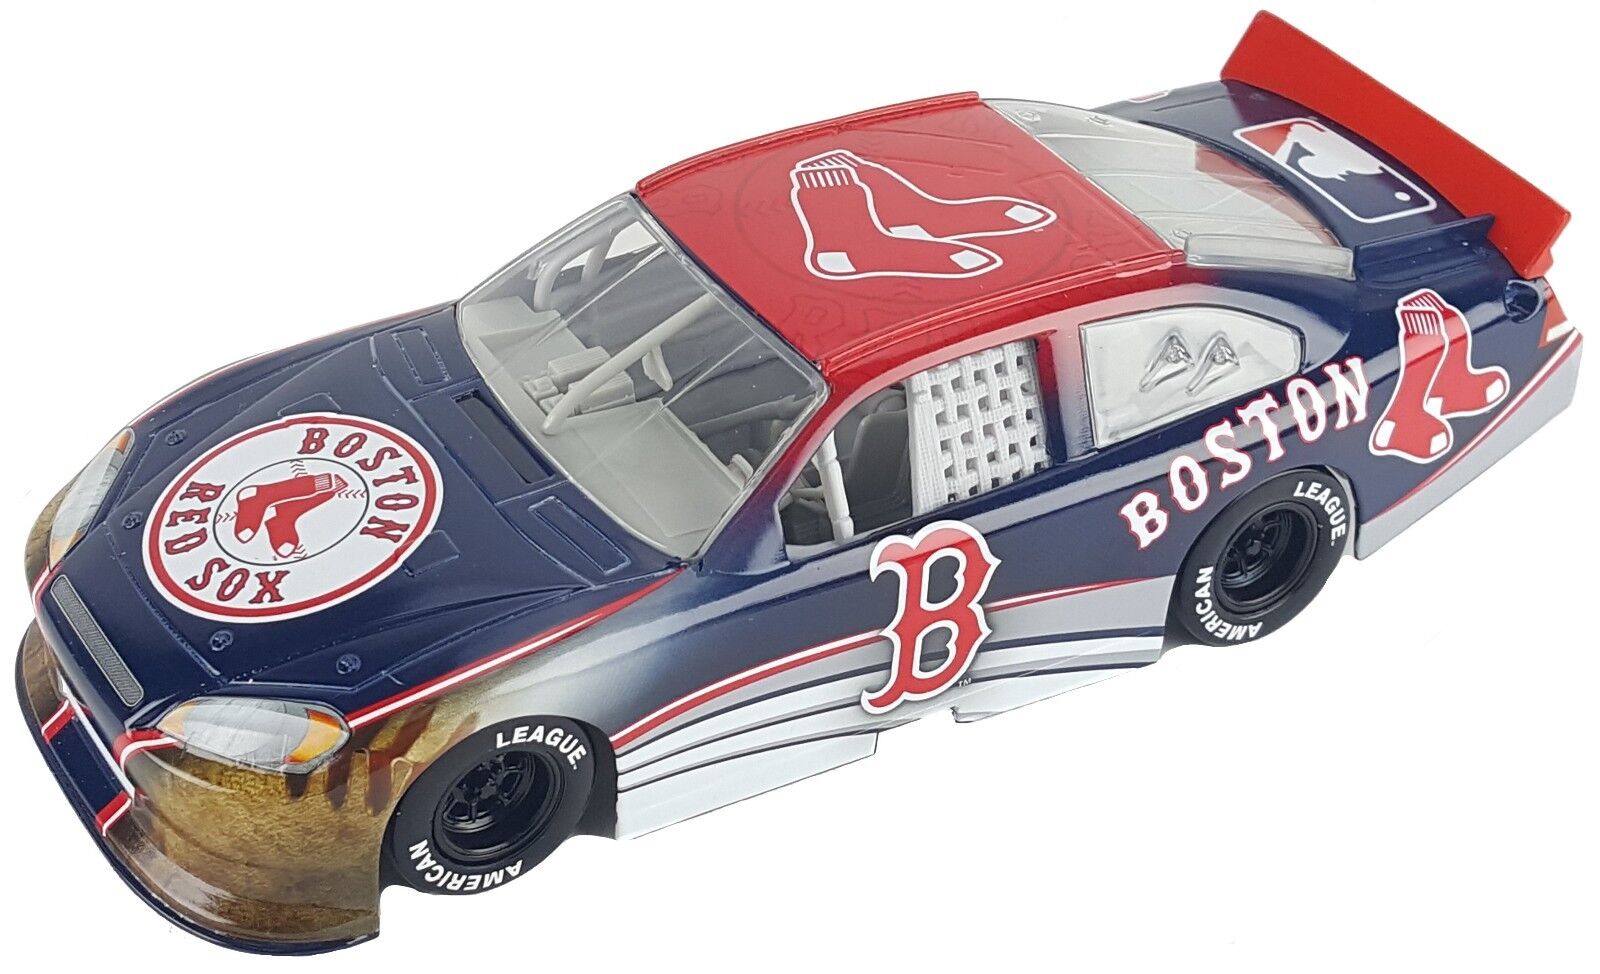 Lionel Racing MLB BOSTON RED SOX 1:24 Scale Nascar Racing Car Model Gold Series